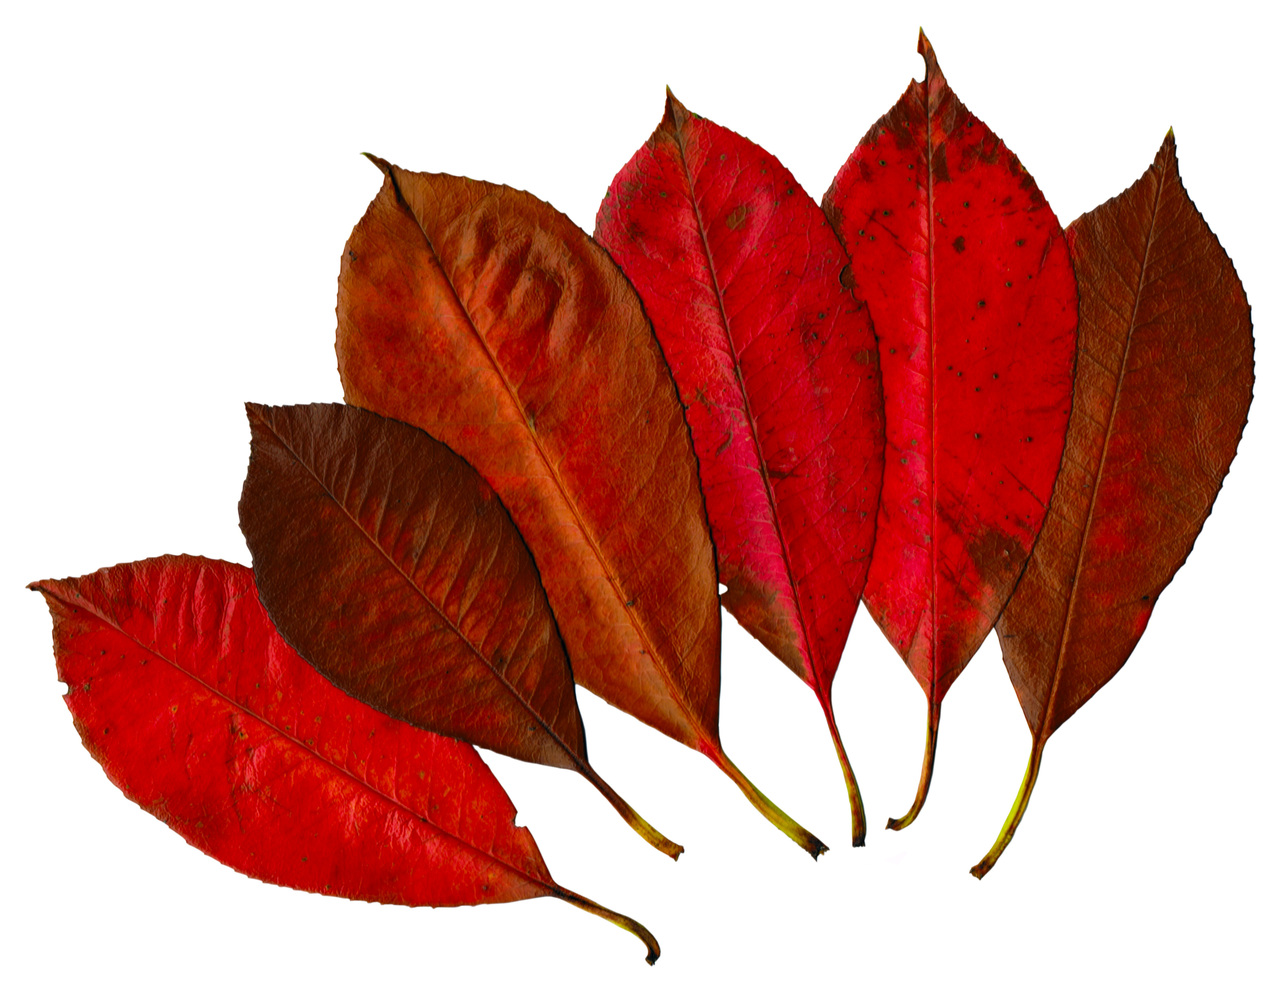 Six red leaves side by side